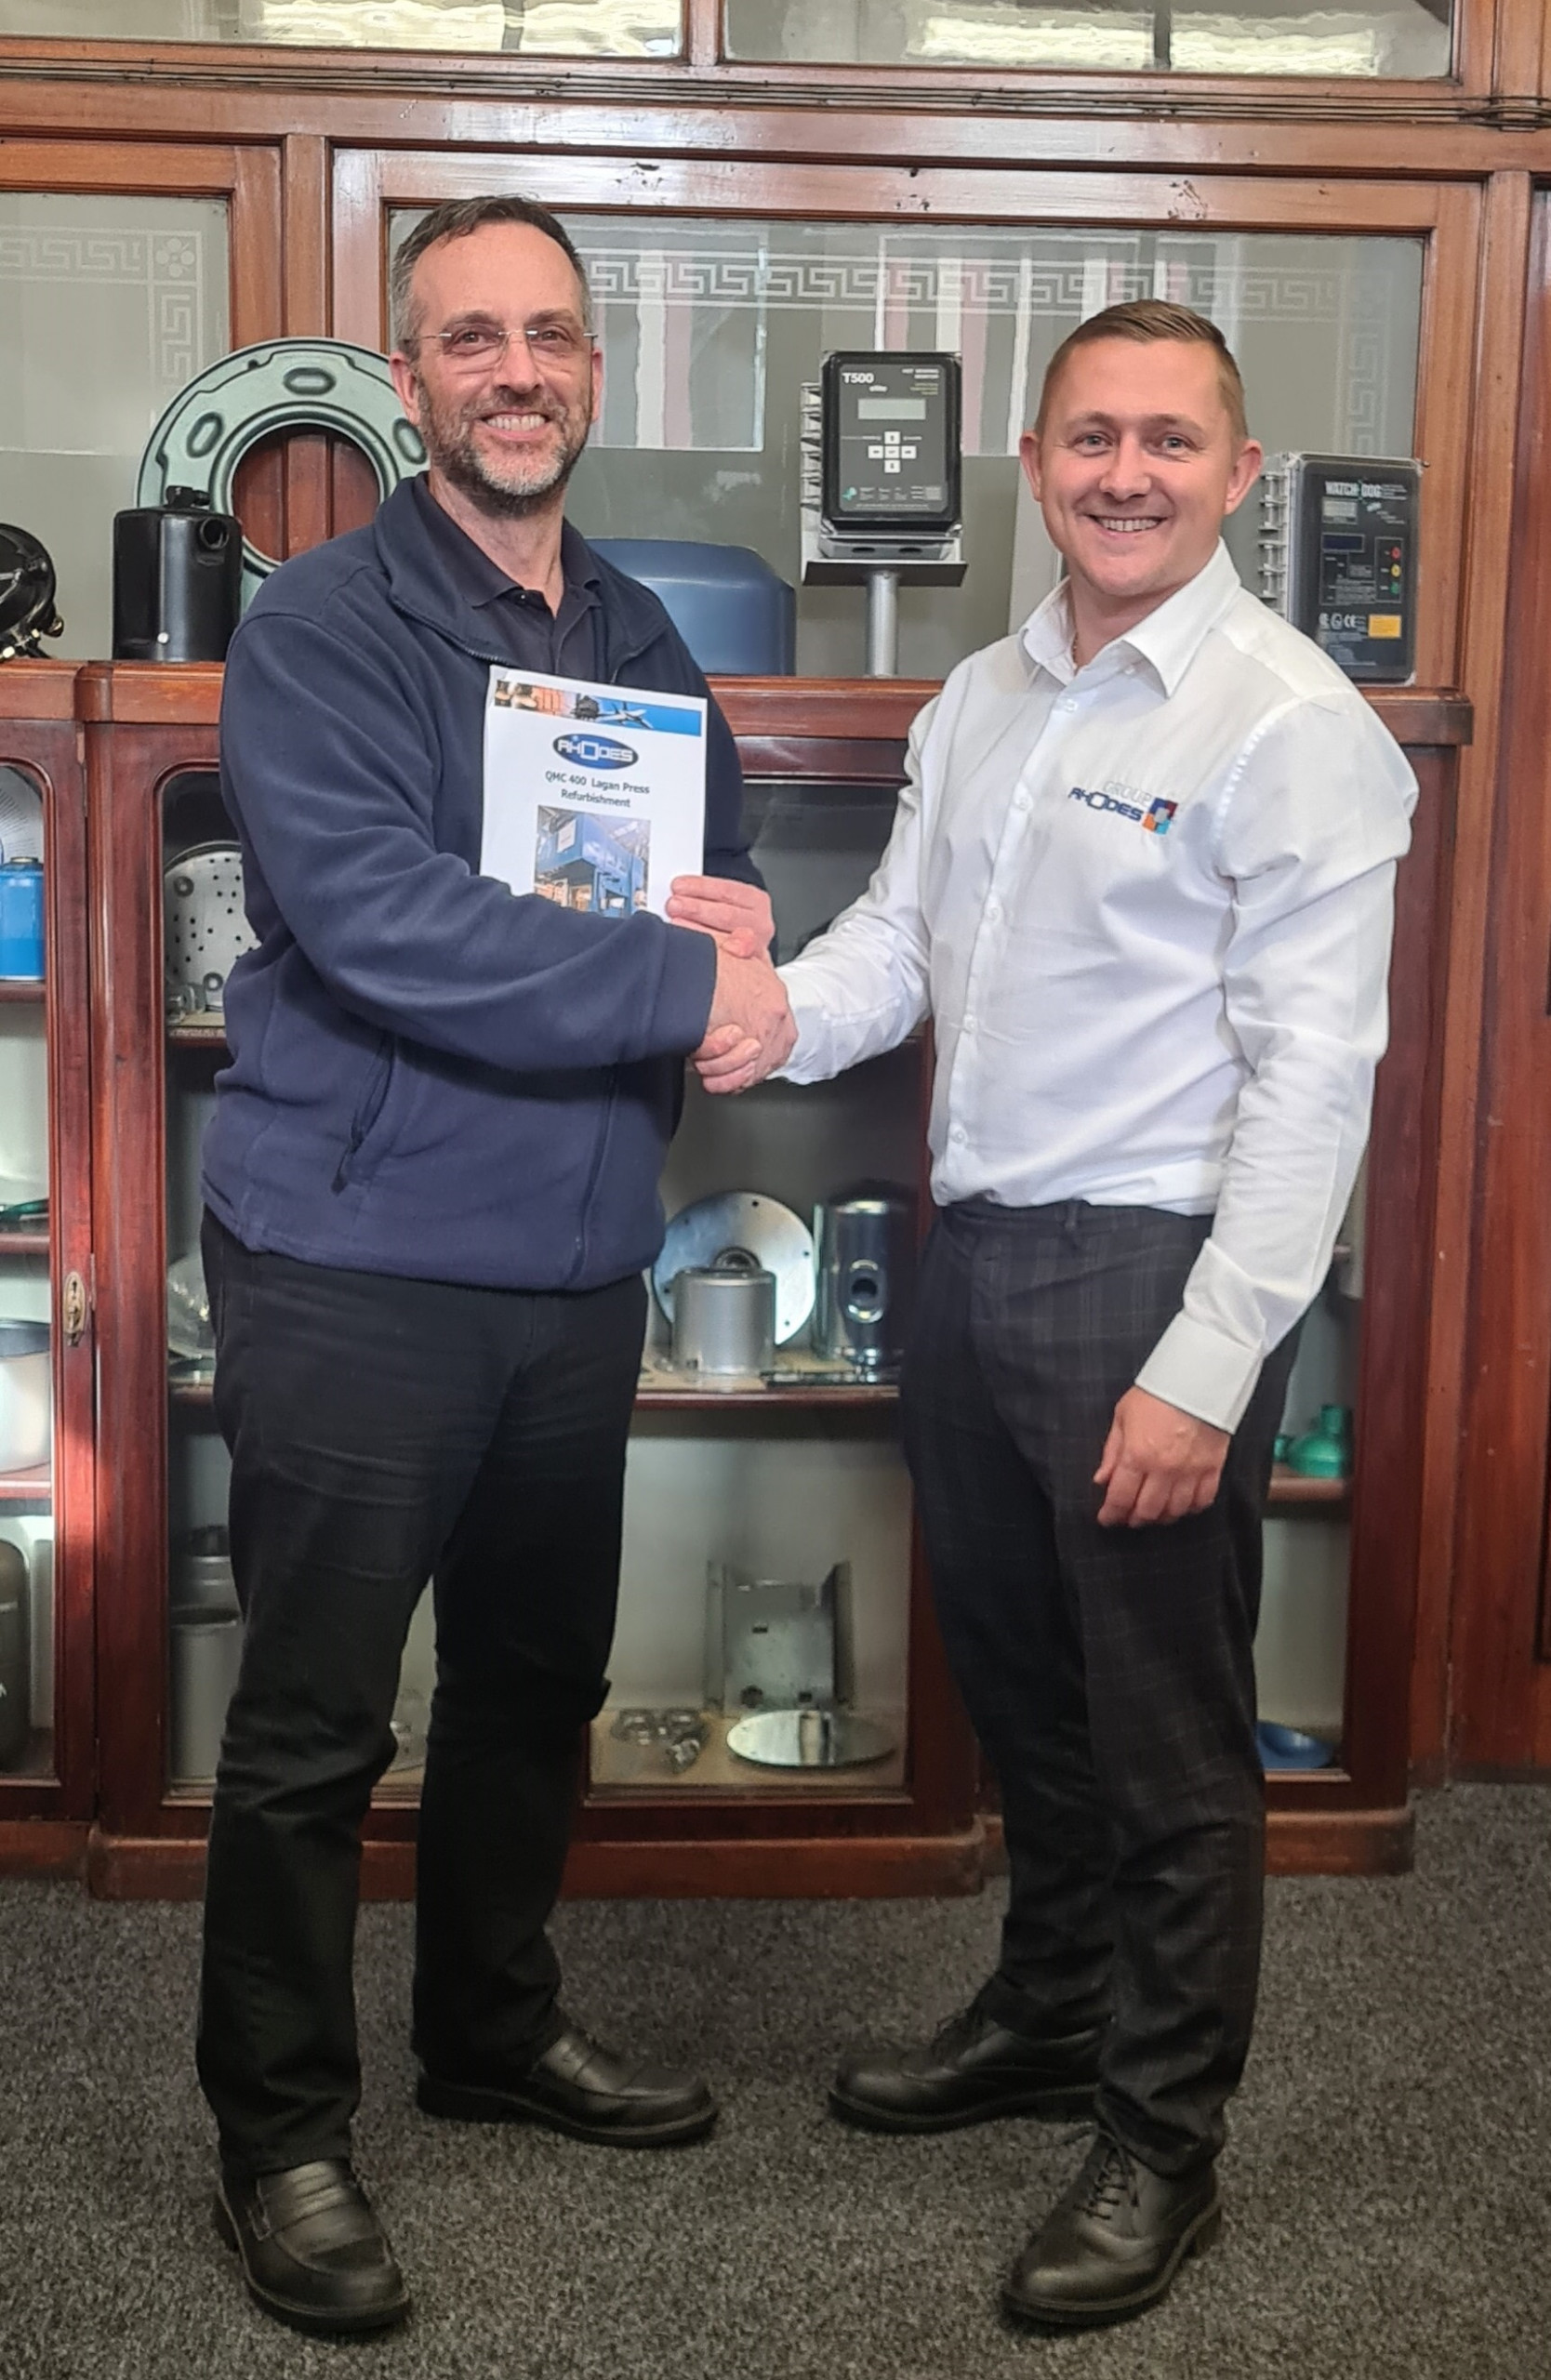 Senior engineer at Rhodes Interform Ben Jennings (right) with Braime Pressings’ Operations Director Alistair Barr after signing the contract to refurbish the press.